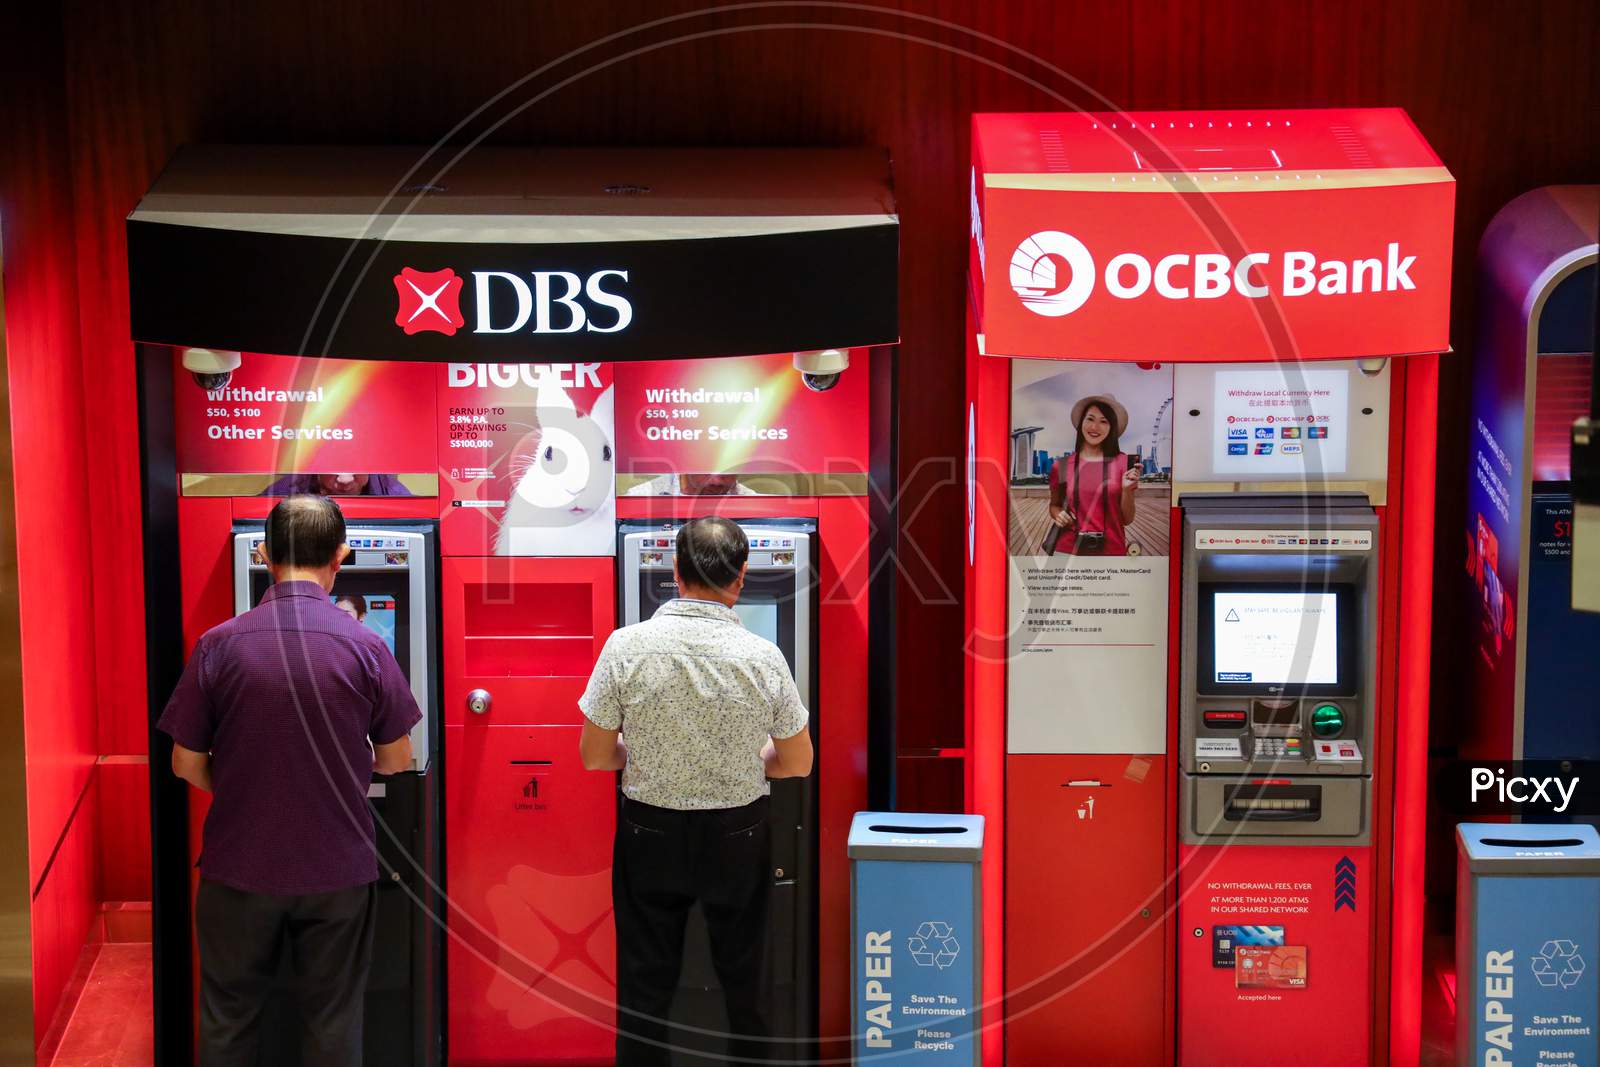 People Using DBS Bank ATM For Cash Withdrawal  in Singapore